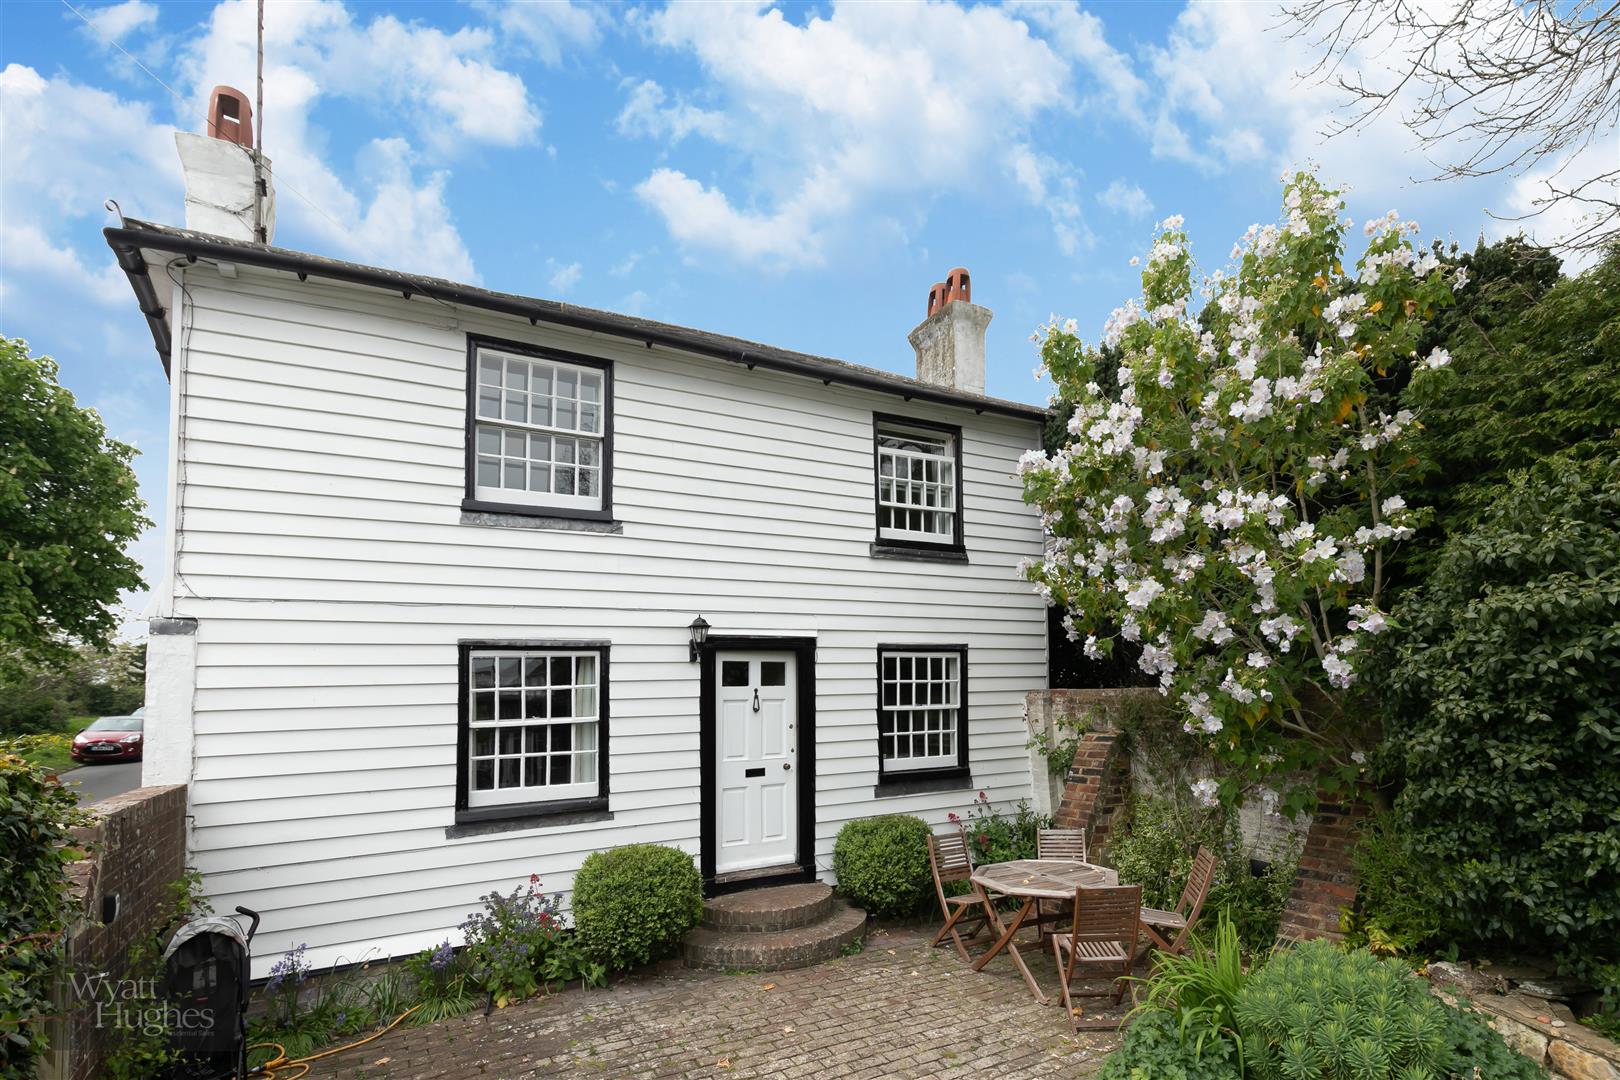 3 bed house for sale in St. Marys Lane, Ticehurst, TN5 